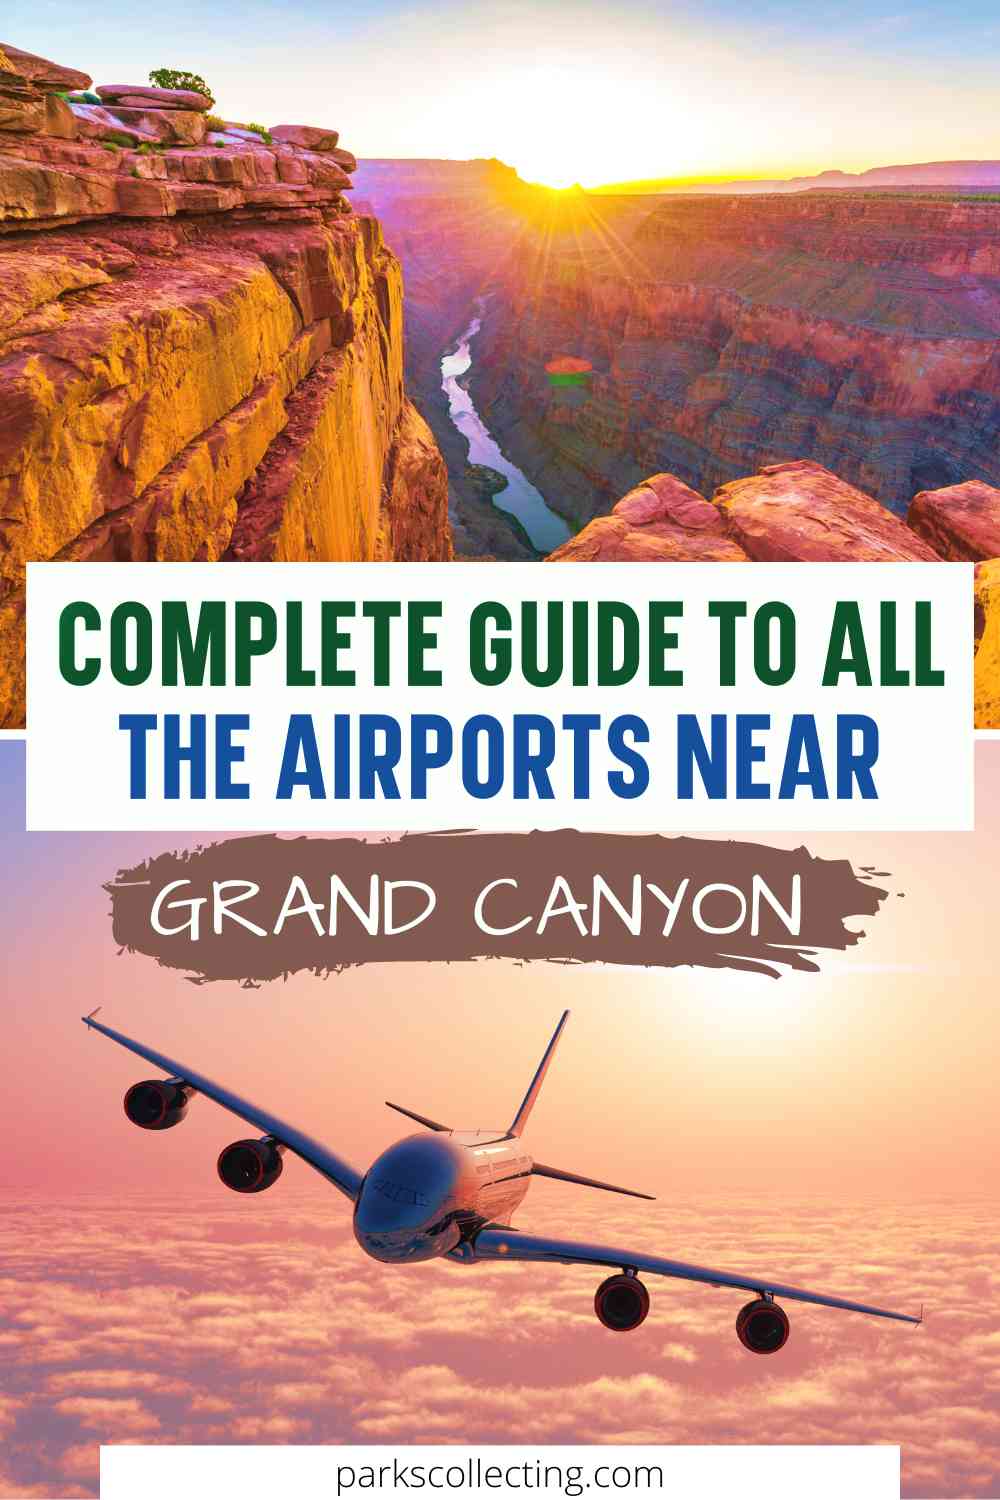 Complete Guide To All The Airports Near Grand Canyon SHORT 22Q4 